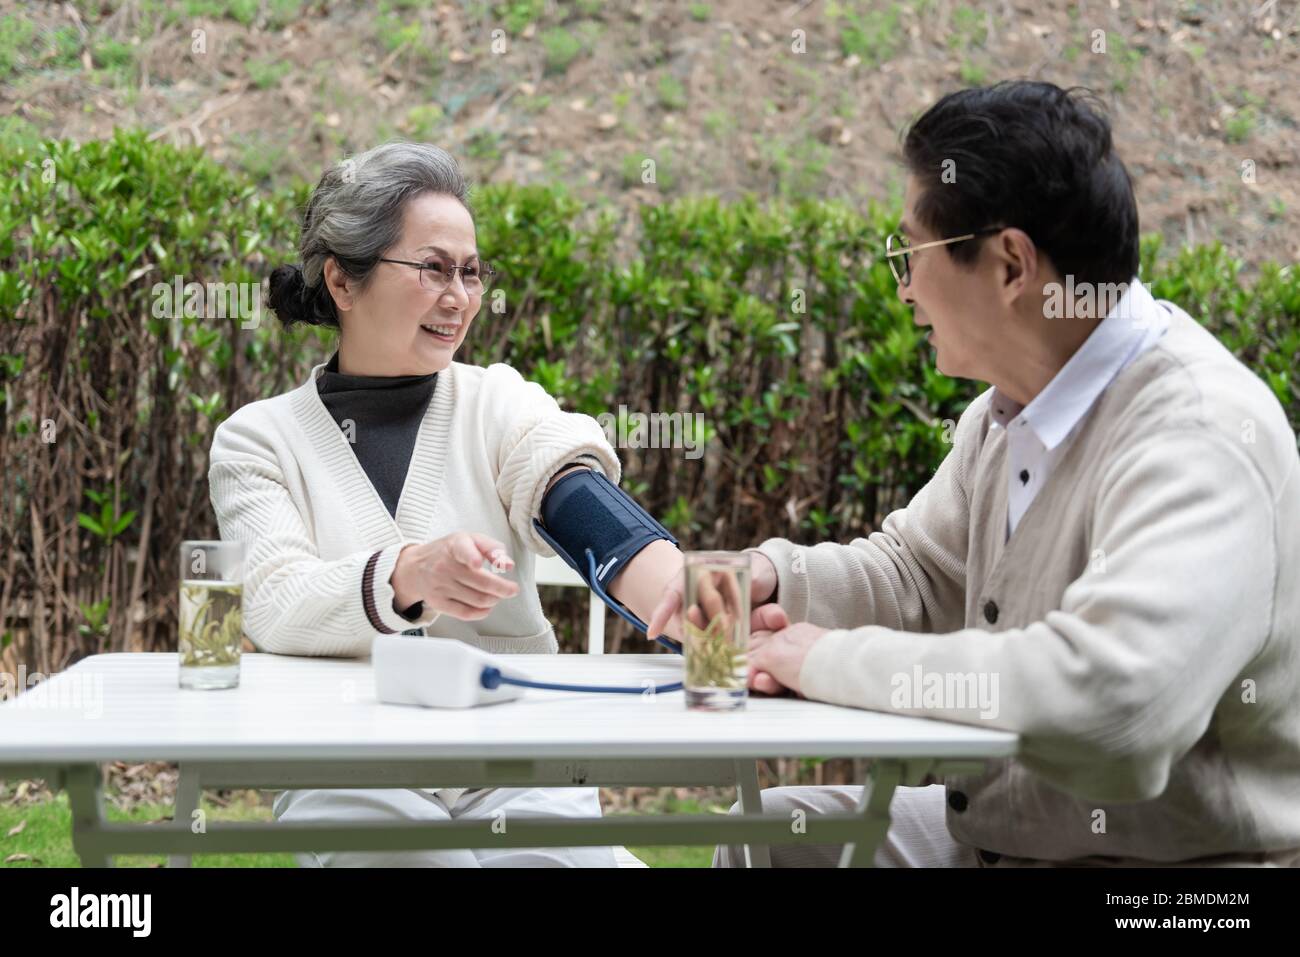 An Asian elderly couple is measuring blood pressure Stock Photo